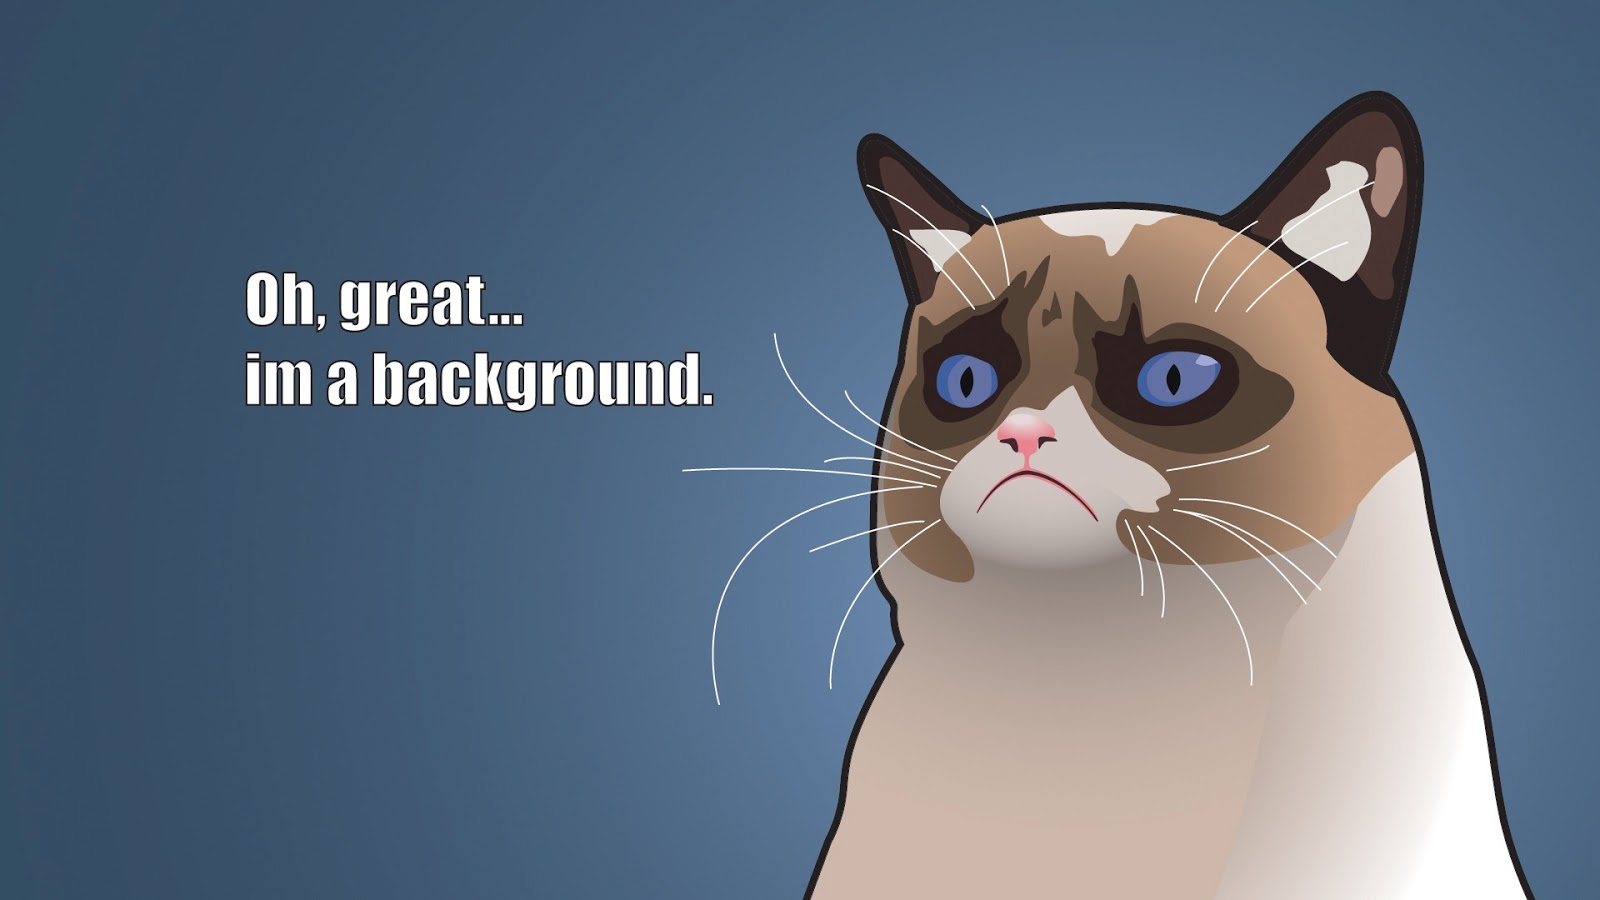 Funny Cartoon Cat 3 Background - Funnypicture.org